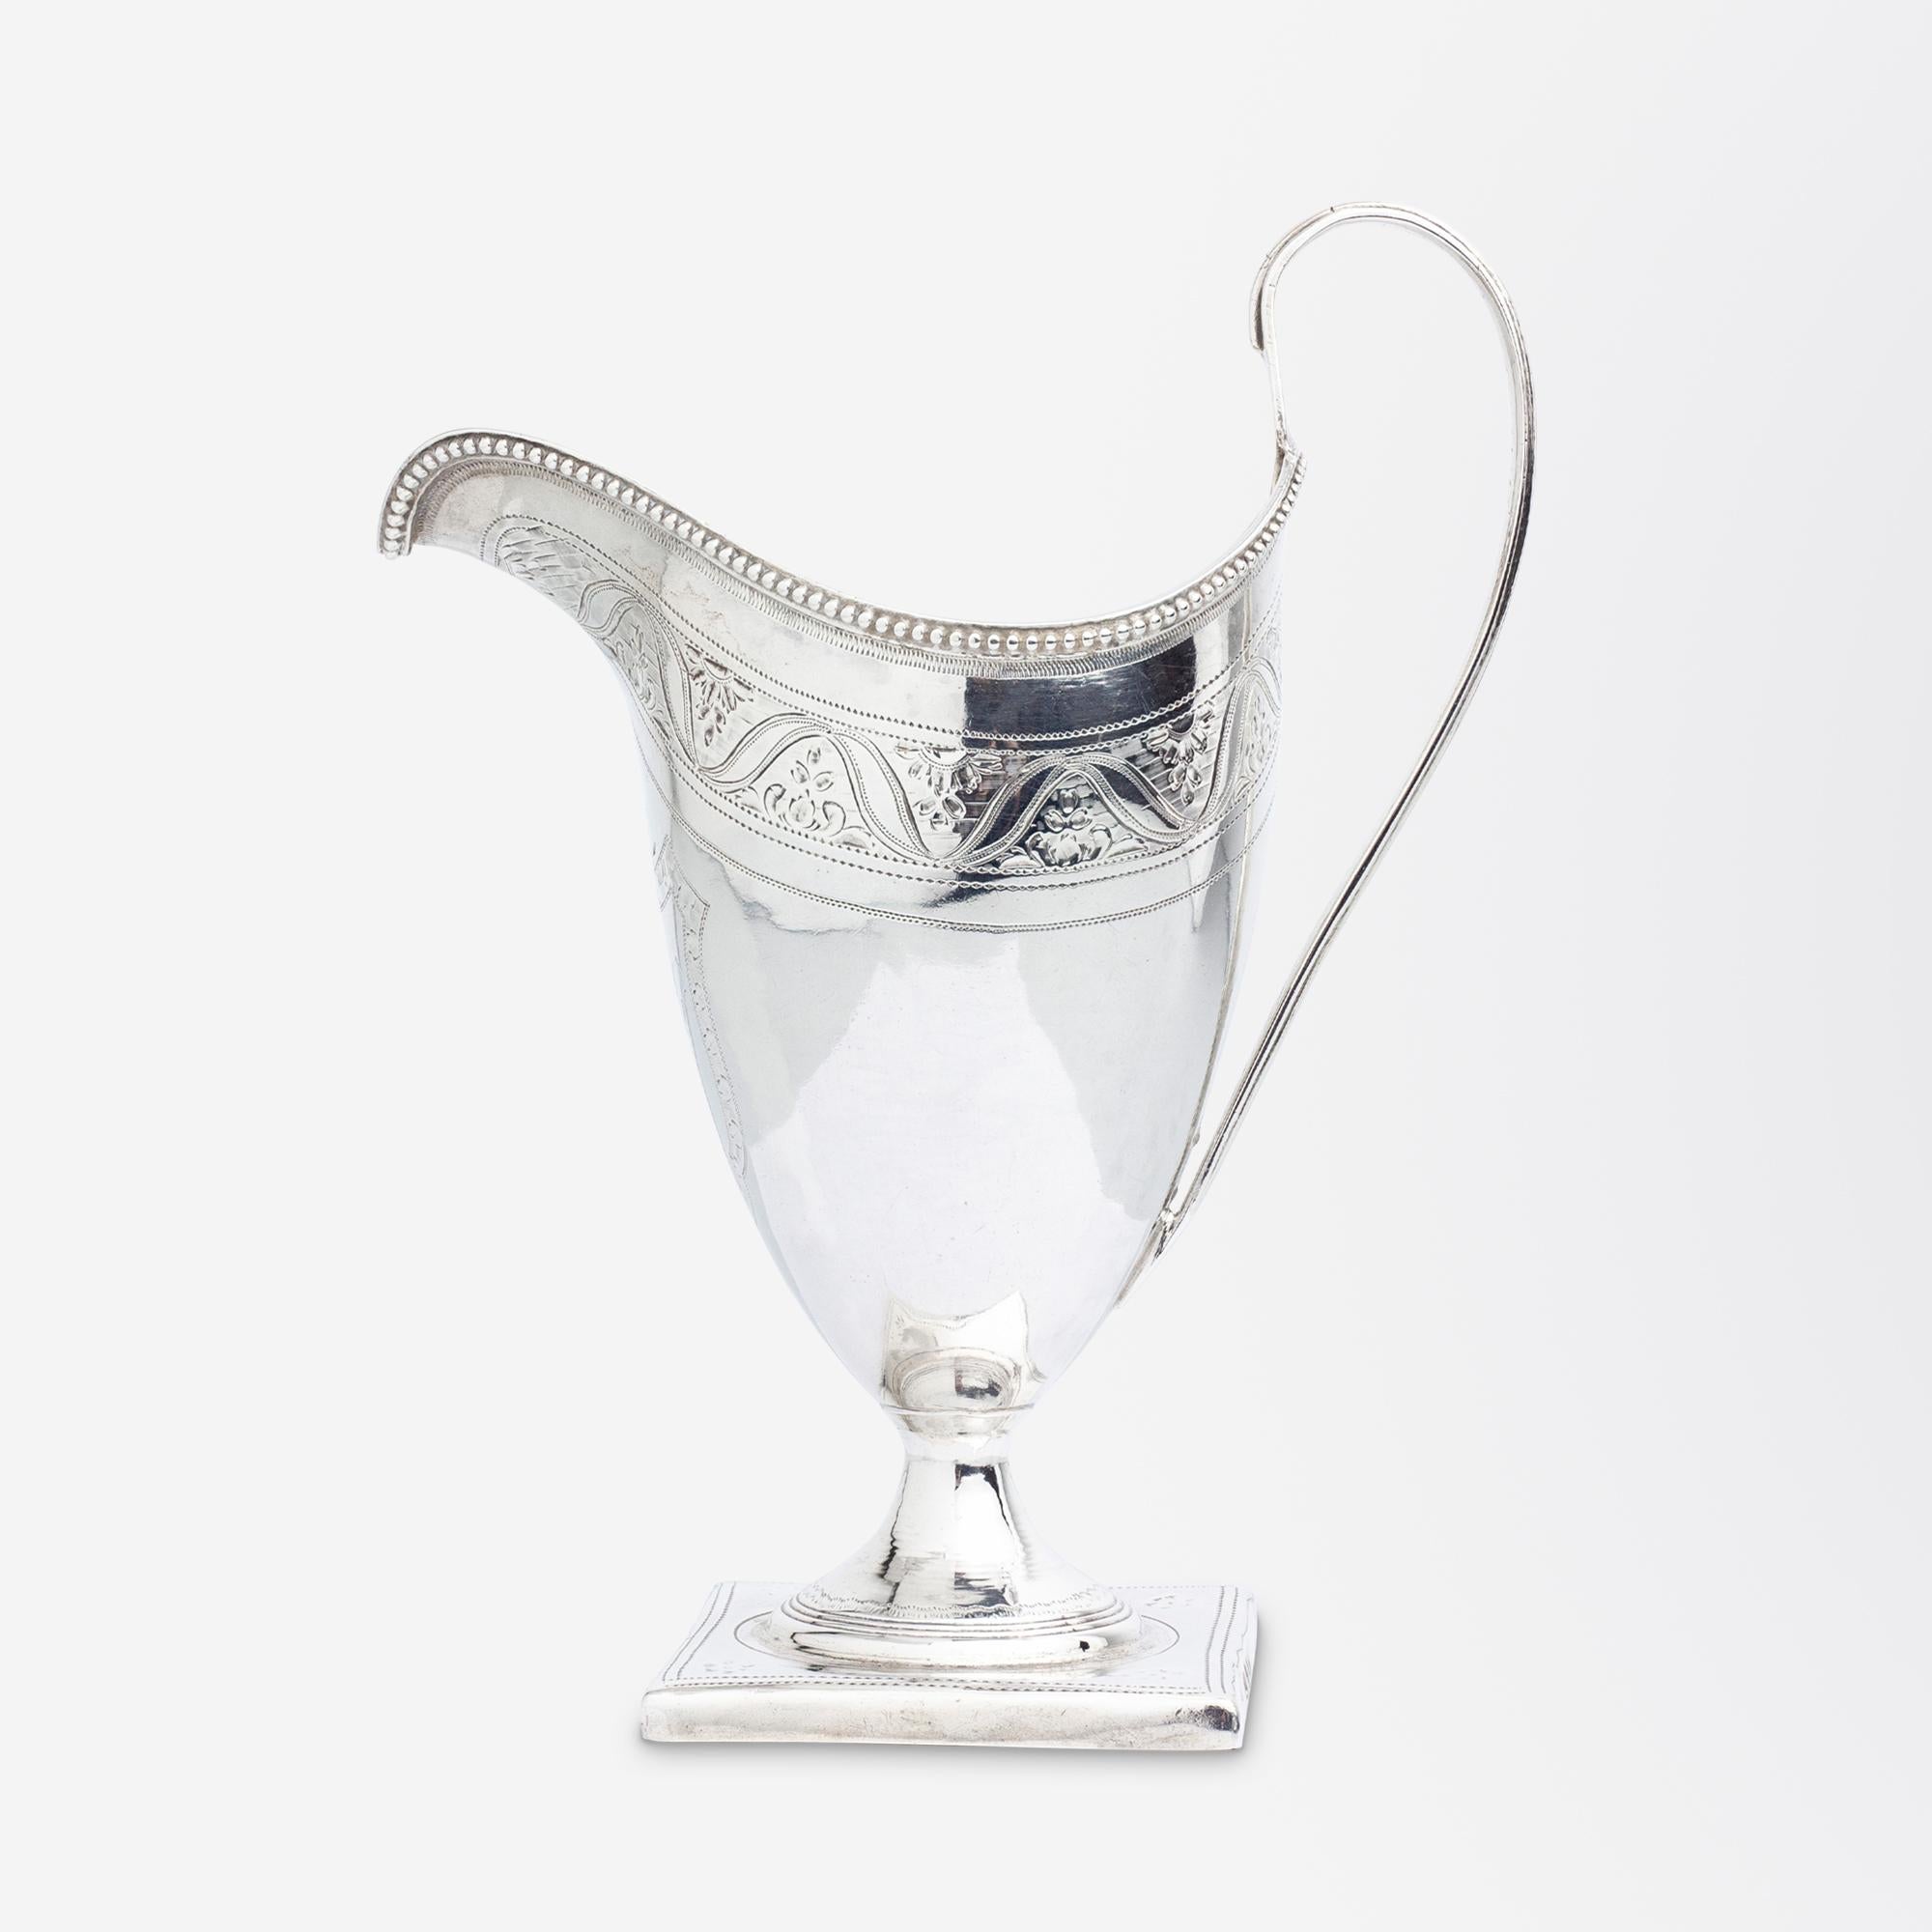 A George III period, sterling silver creamer with a monogrammed crest and beaded rim by Peter & Ann Bateman of the famed Bateman silversmithing family. This rather lovely creamer sits atop of a square foot and has an elongated handle typical of the